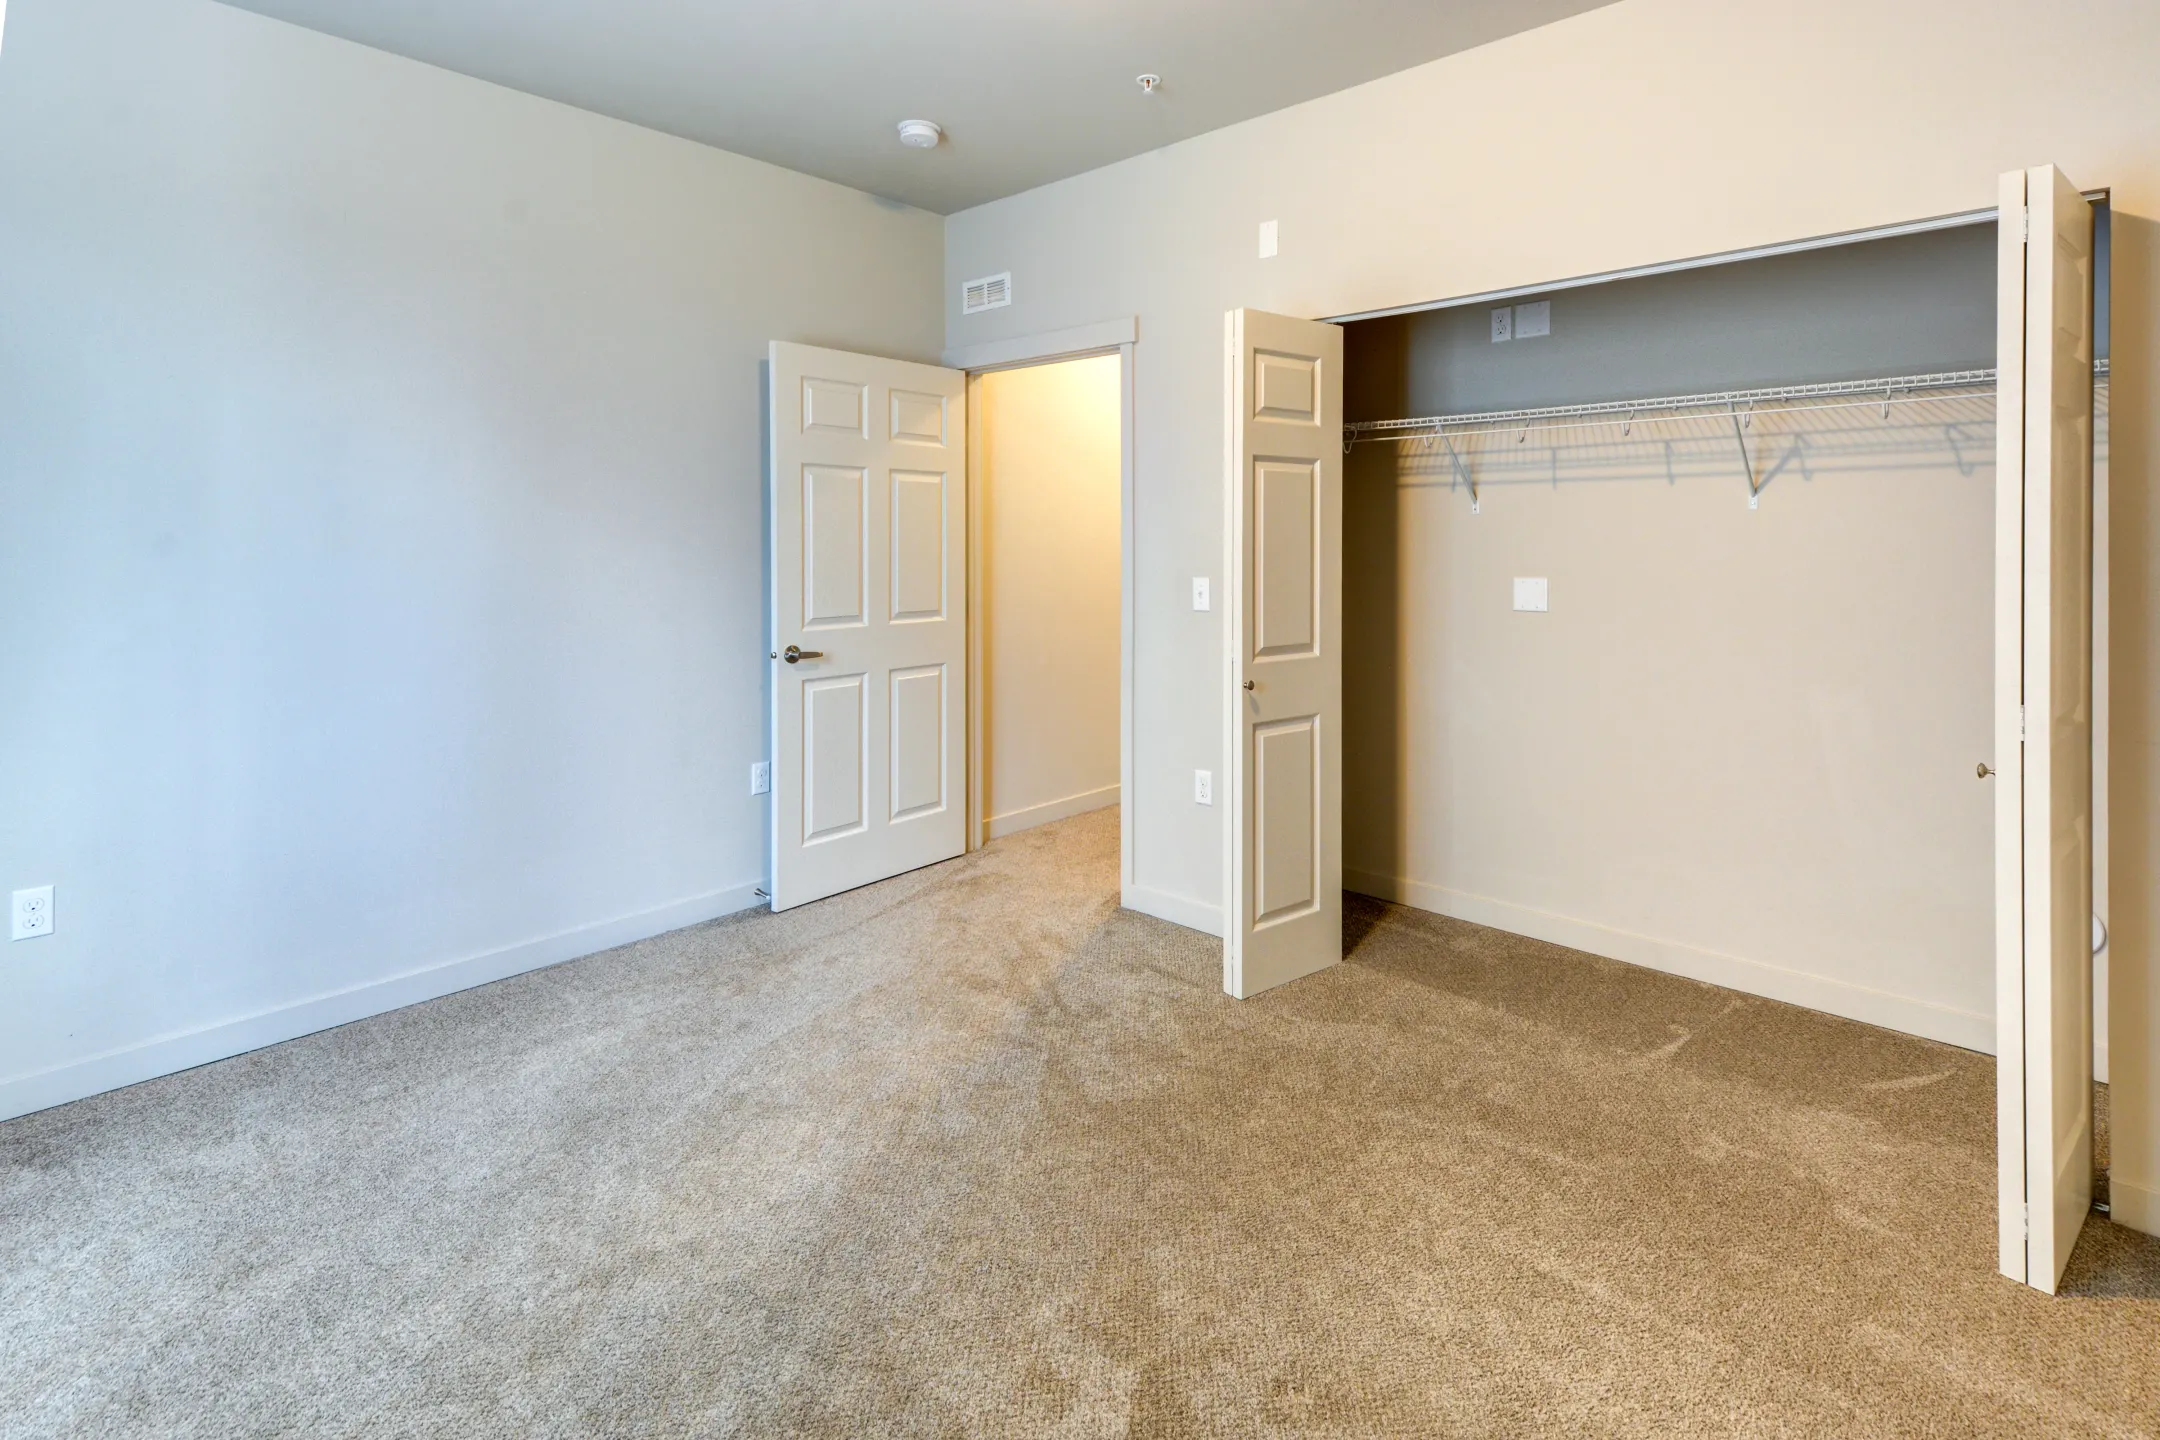 Bedroom - Crown Pointe Apartments - Post Falls, ID